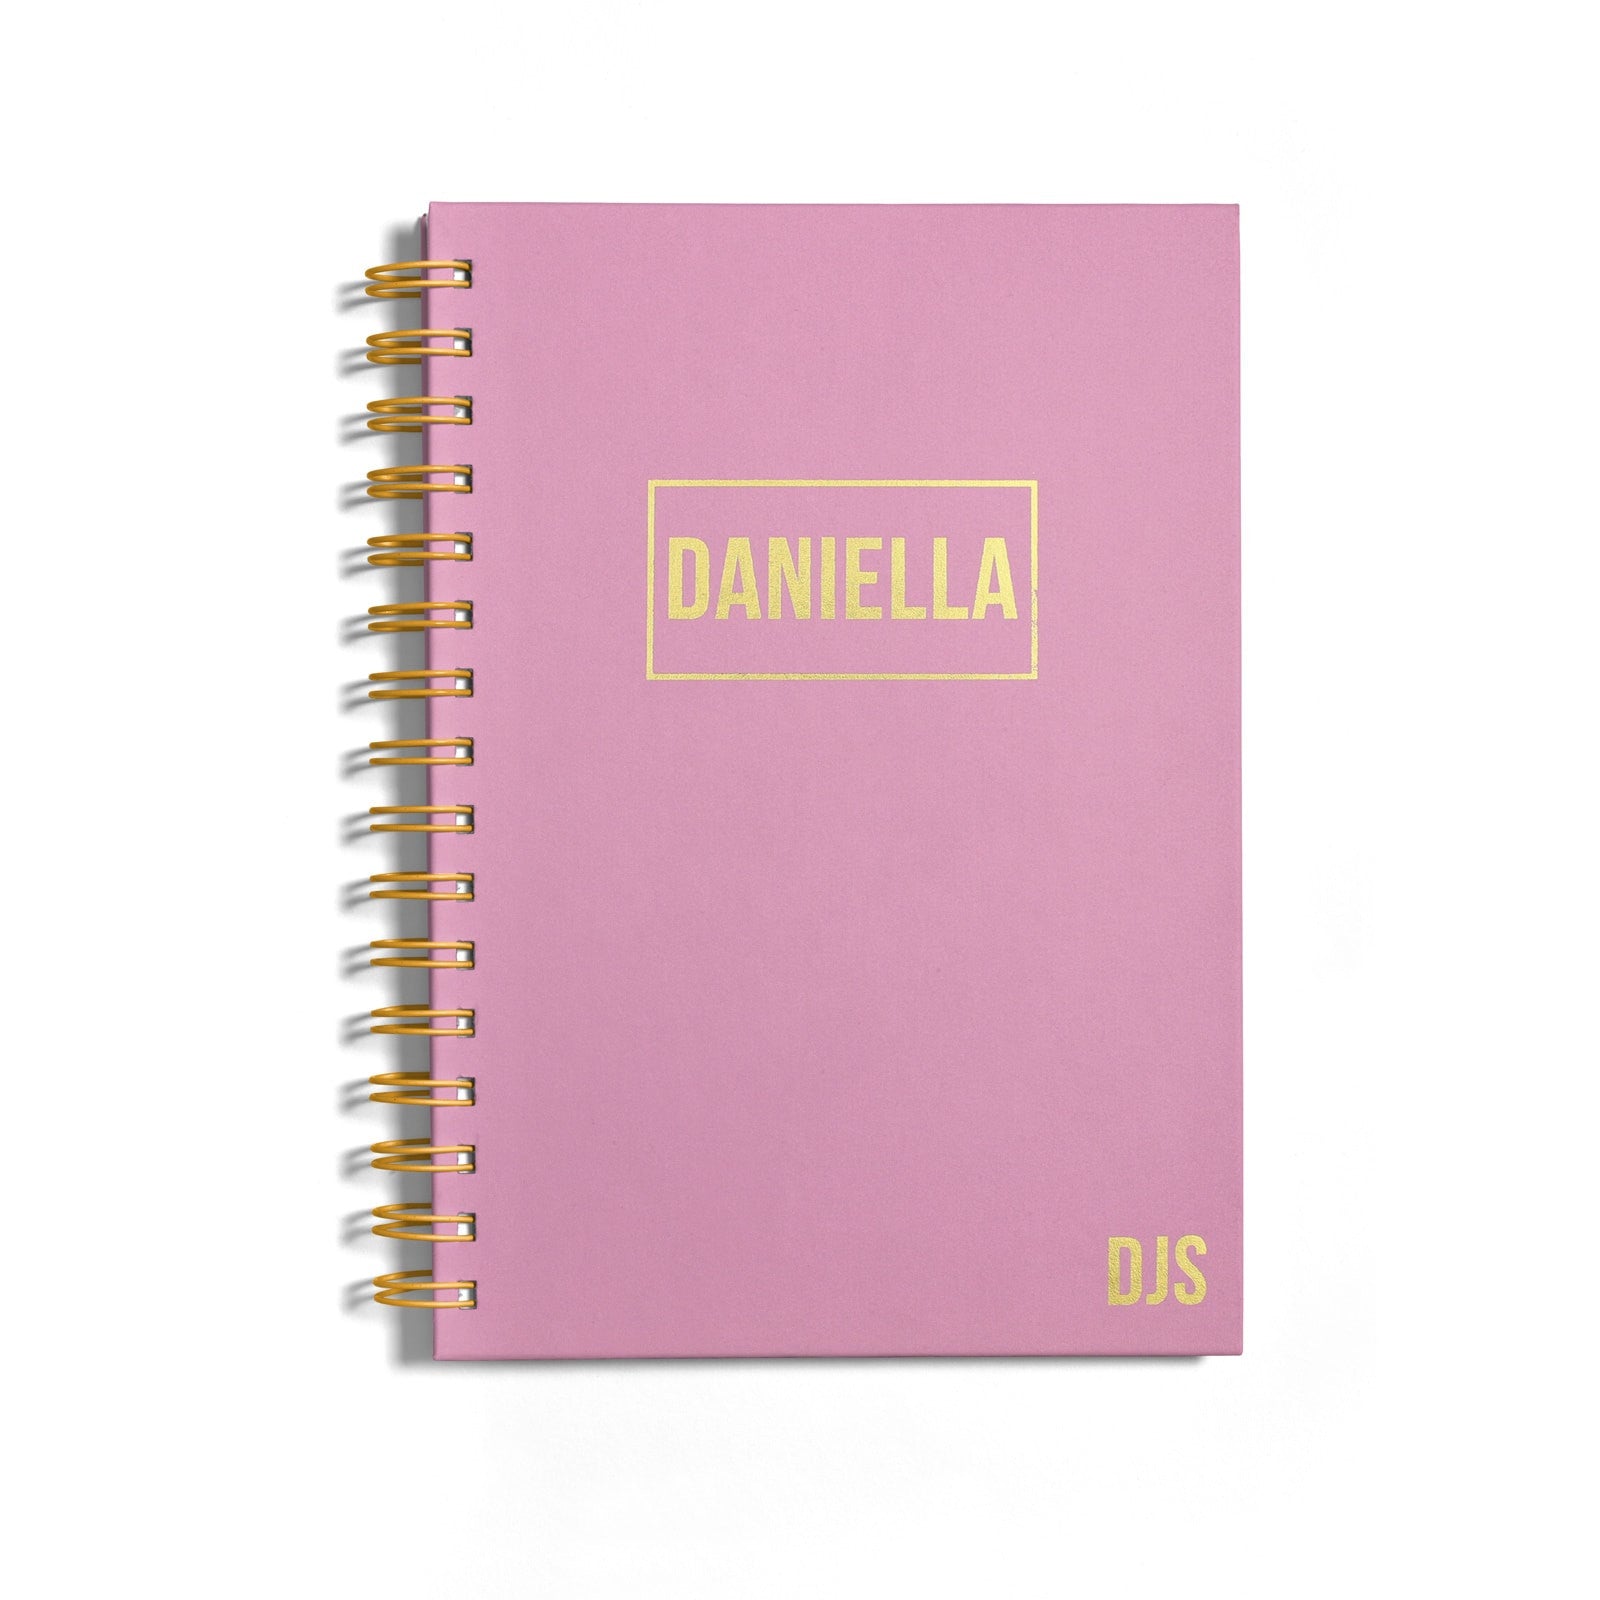 Personalised Gold Foil Notebook with Name & Initials